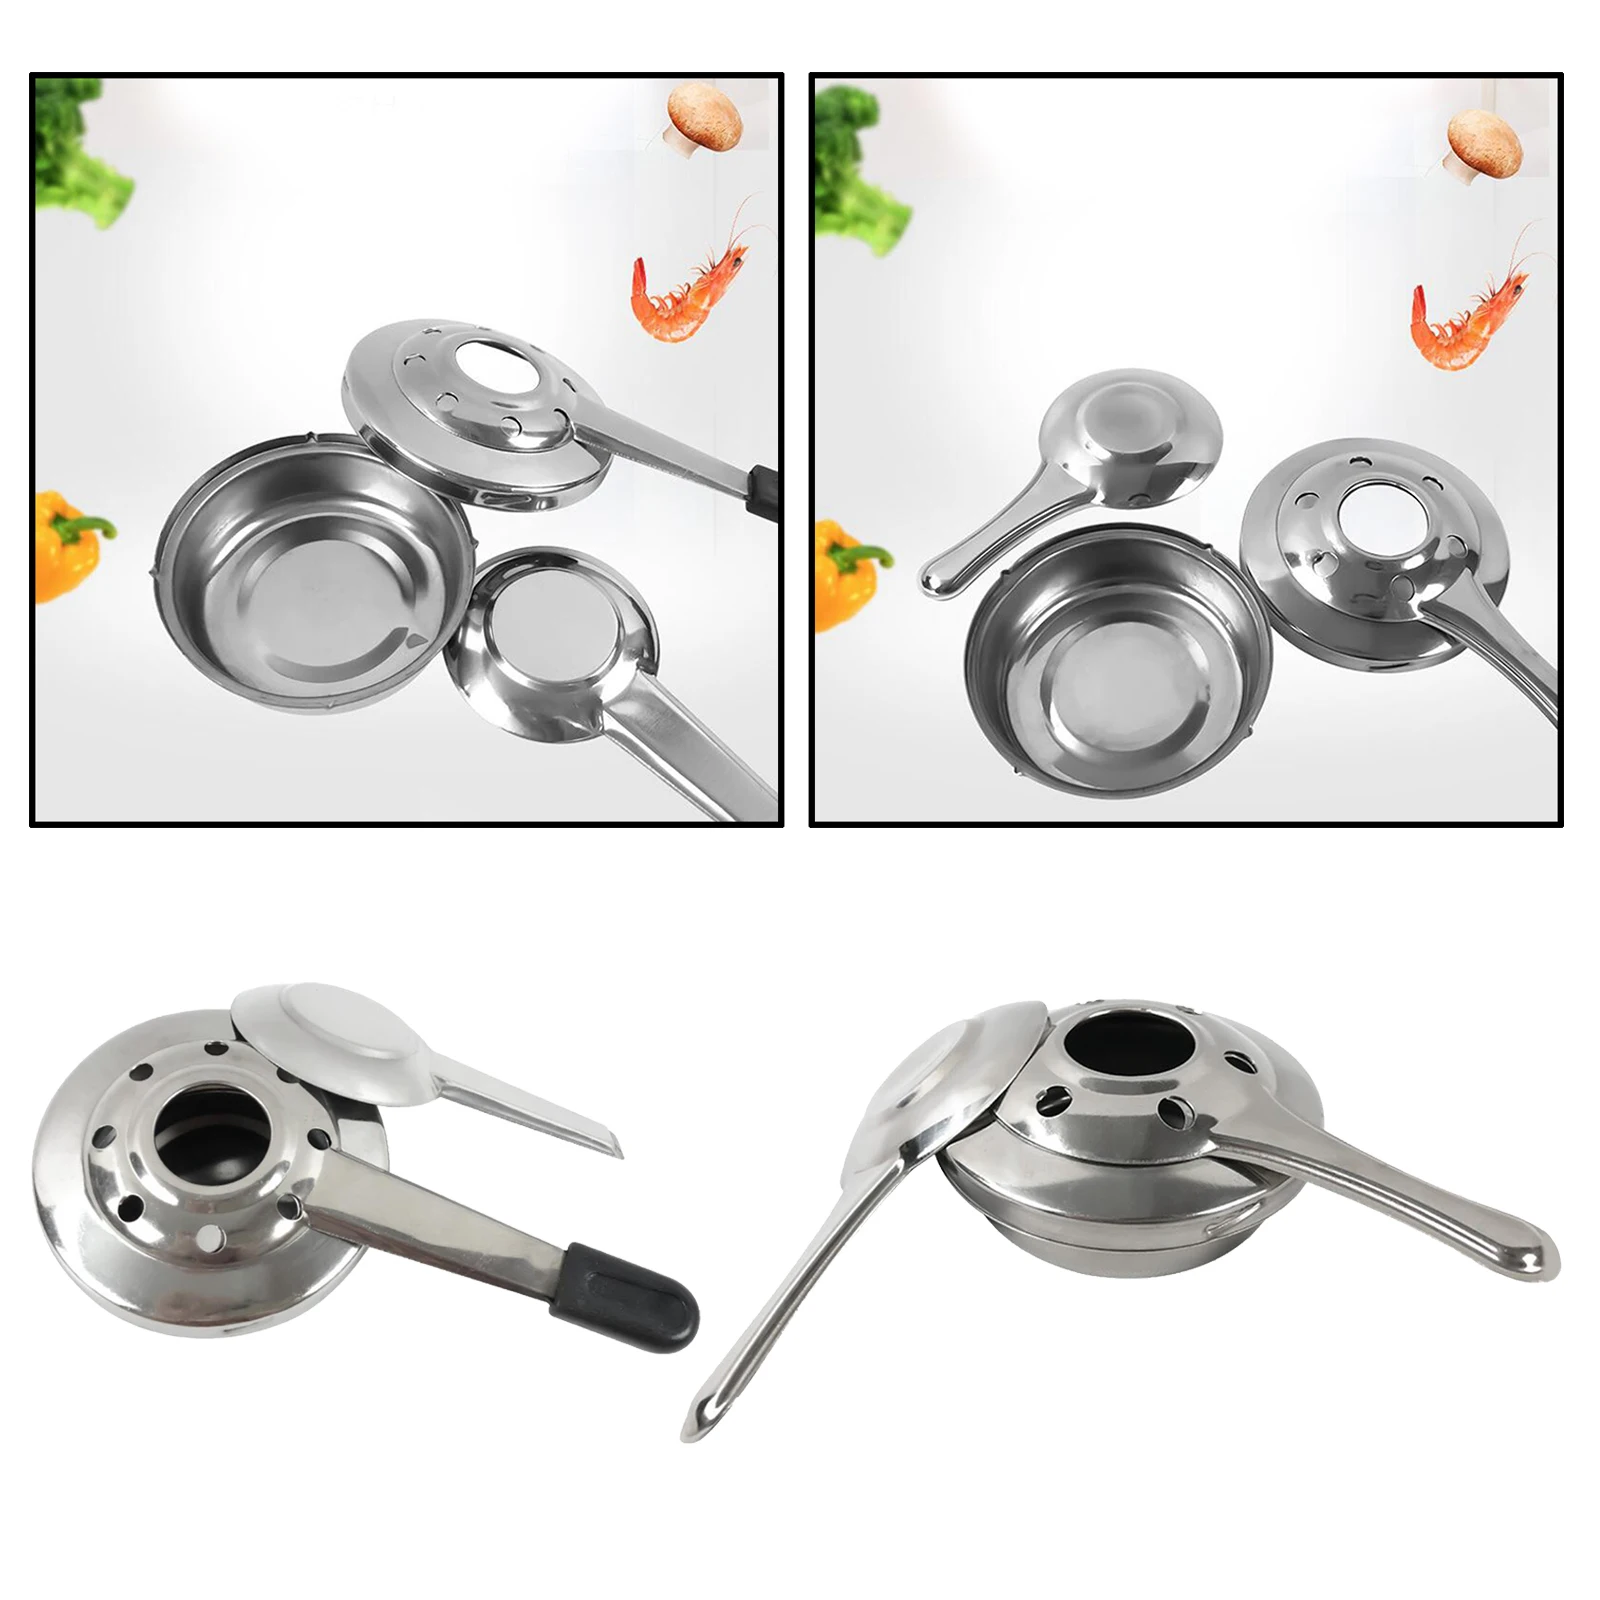 Compact Portable Backpacker Long Handle Alcohol Stove Outdoor Small Burner Cooker with Lid Camping Emergency Survival